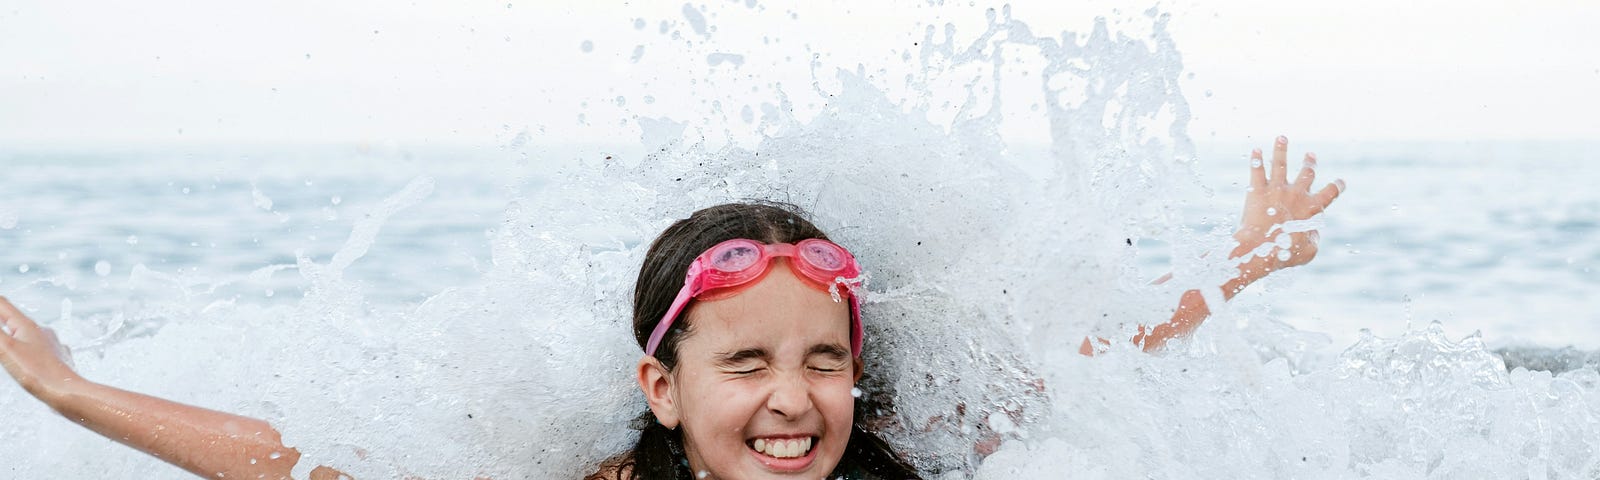 Little girl splashing on the shore with a happy expression on her face, arms spread out